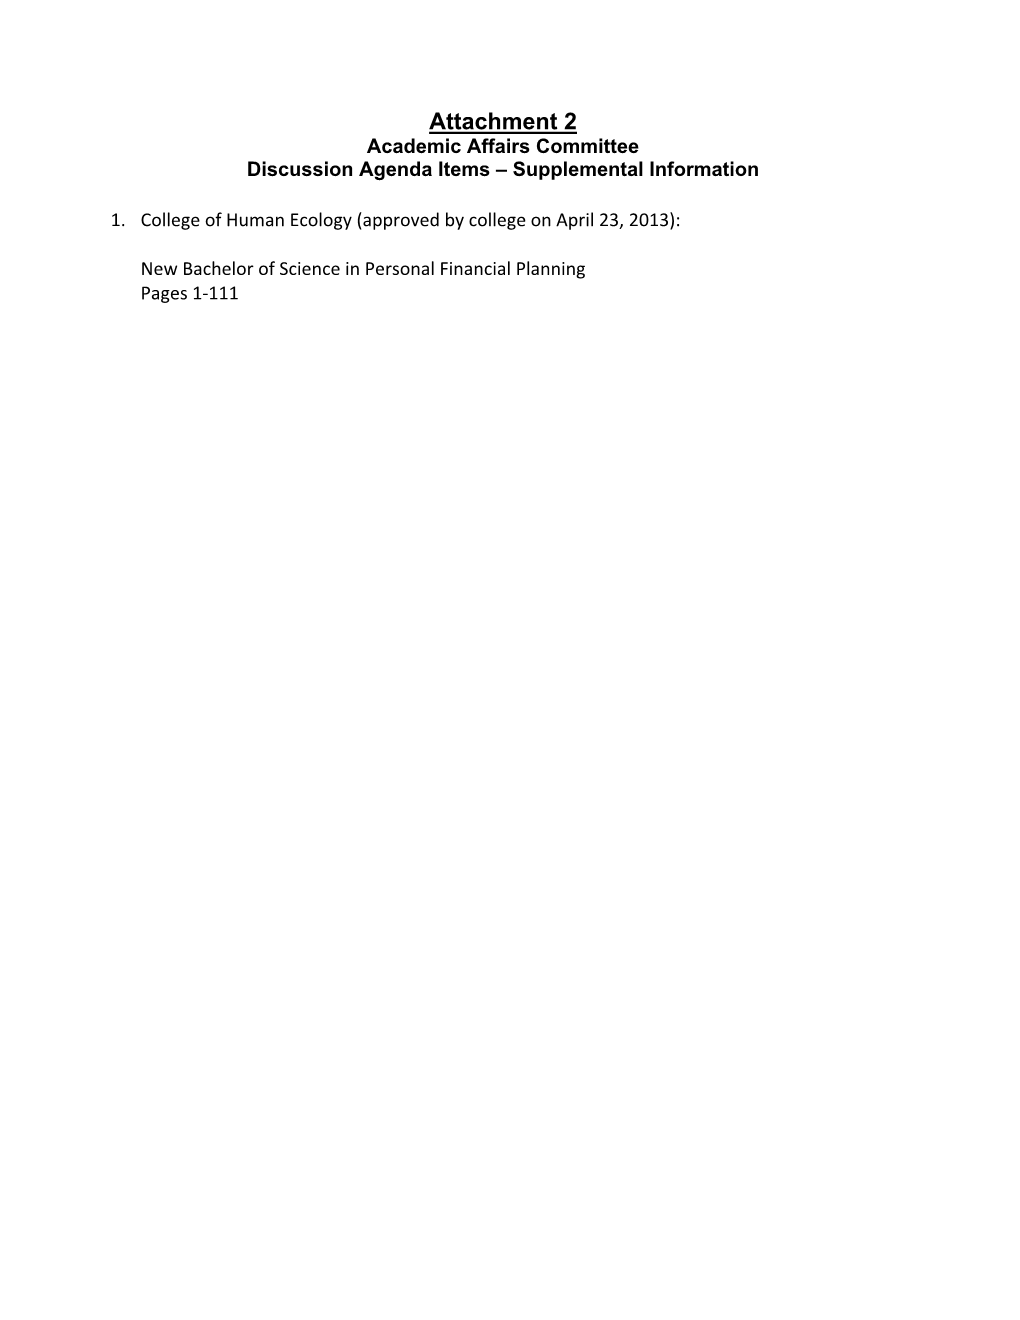 Attachment 2 Academic Affairs Committee Discussion Agenda Items – Supplemental Information